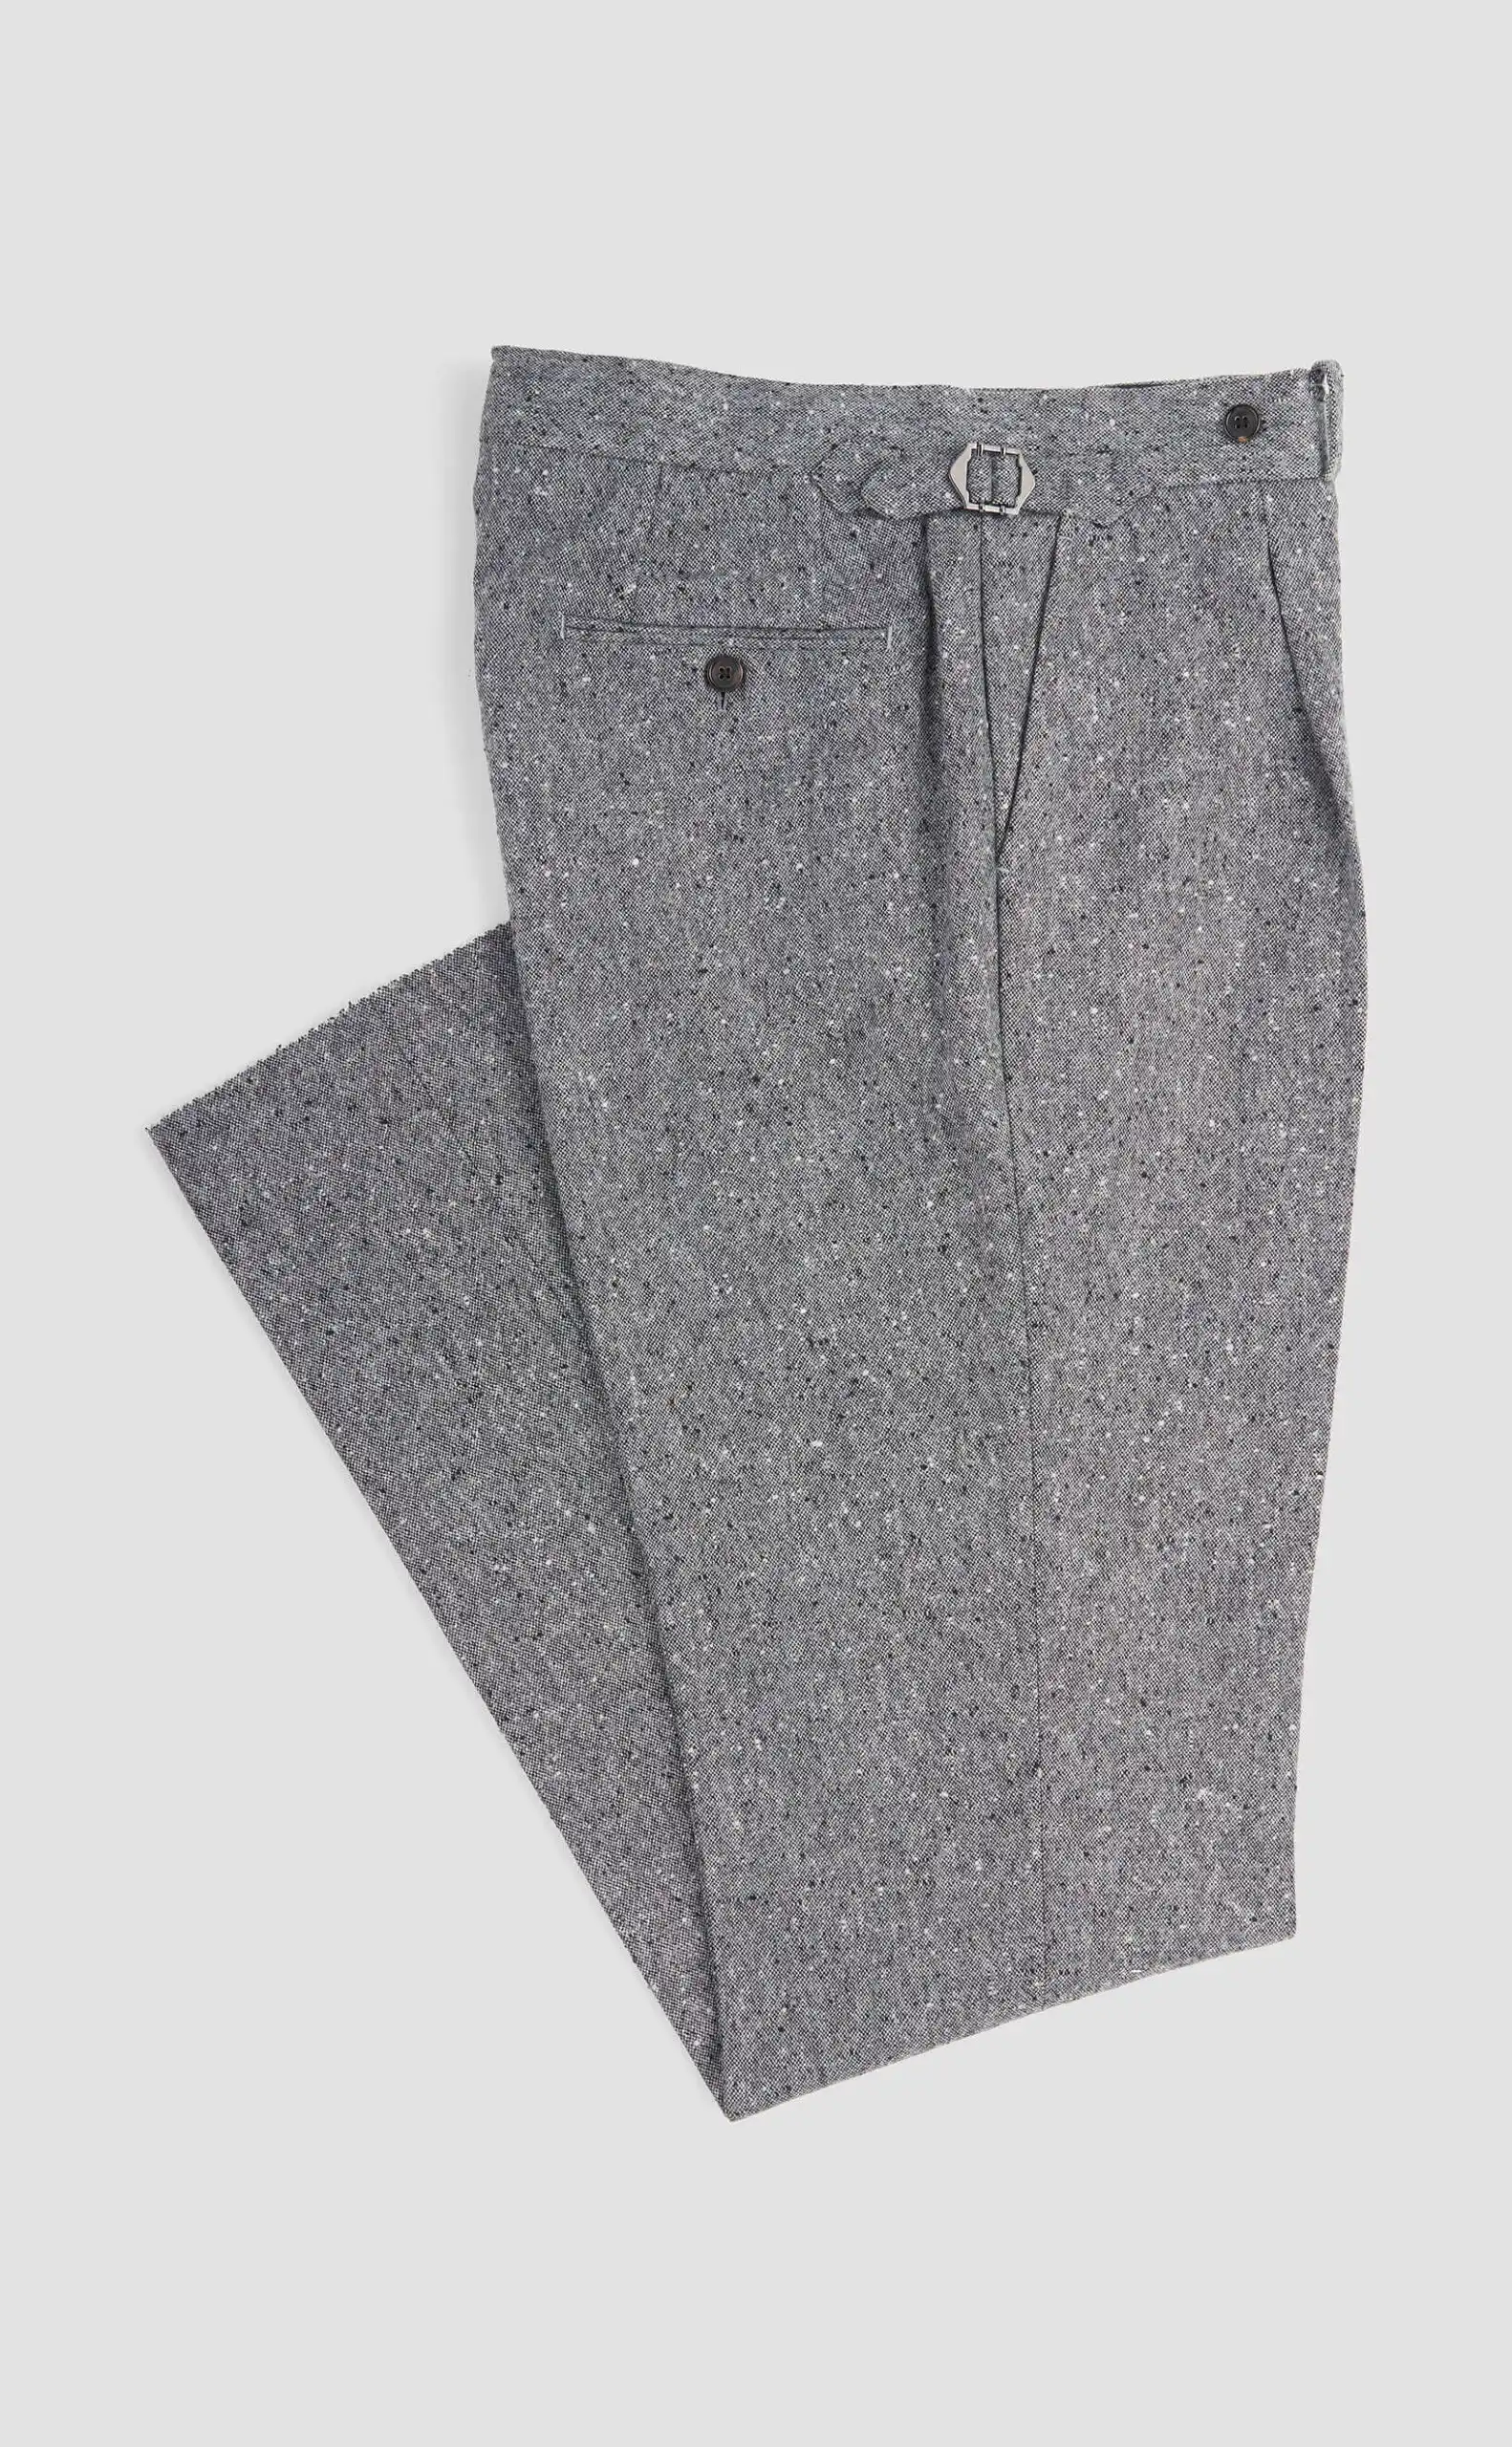 Spier & Mackay Gray Knopped Donegal Tweed Trousers